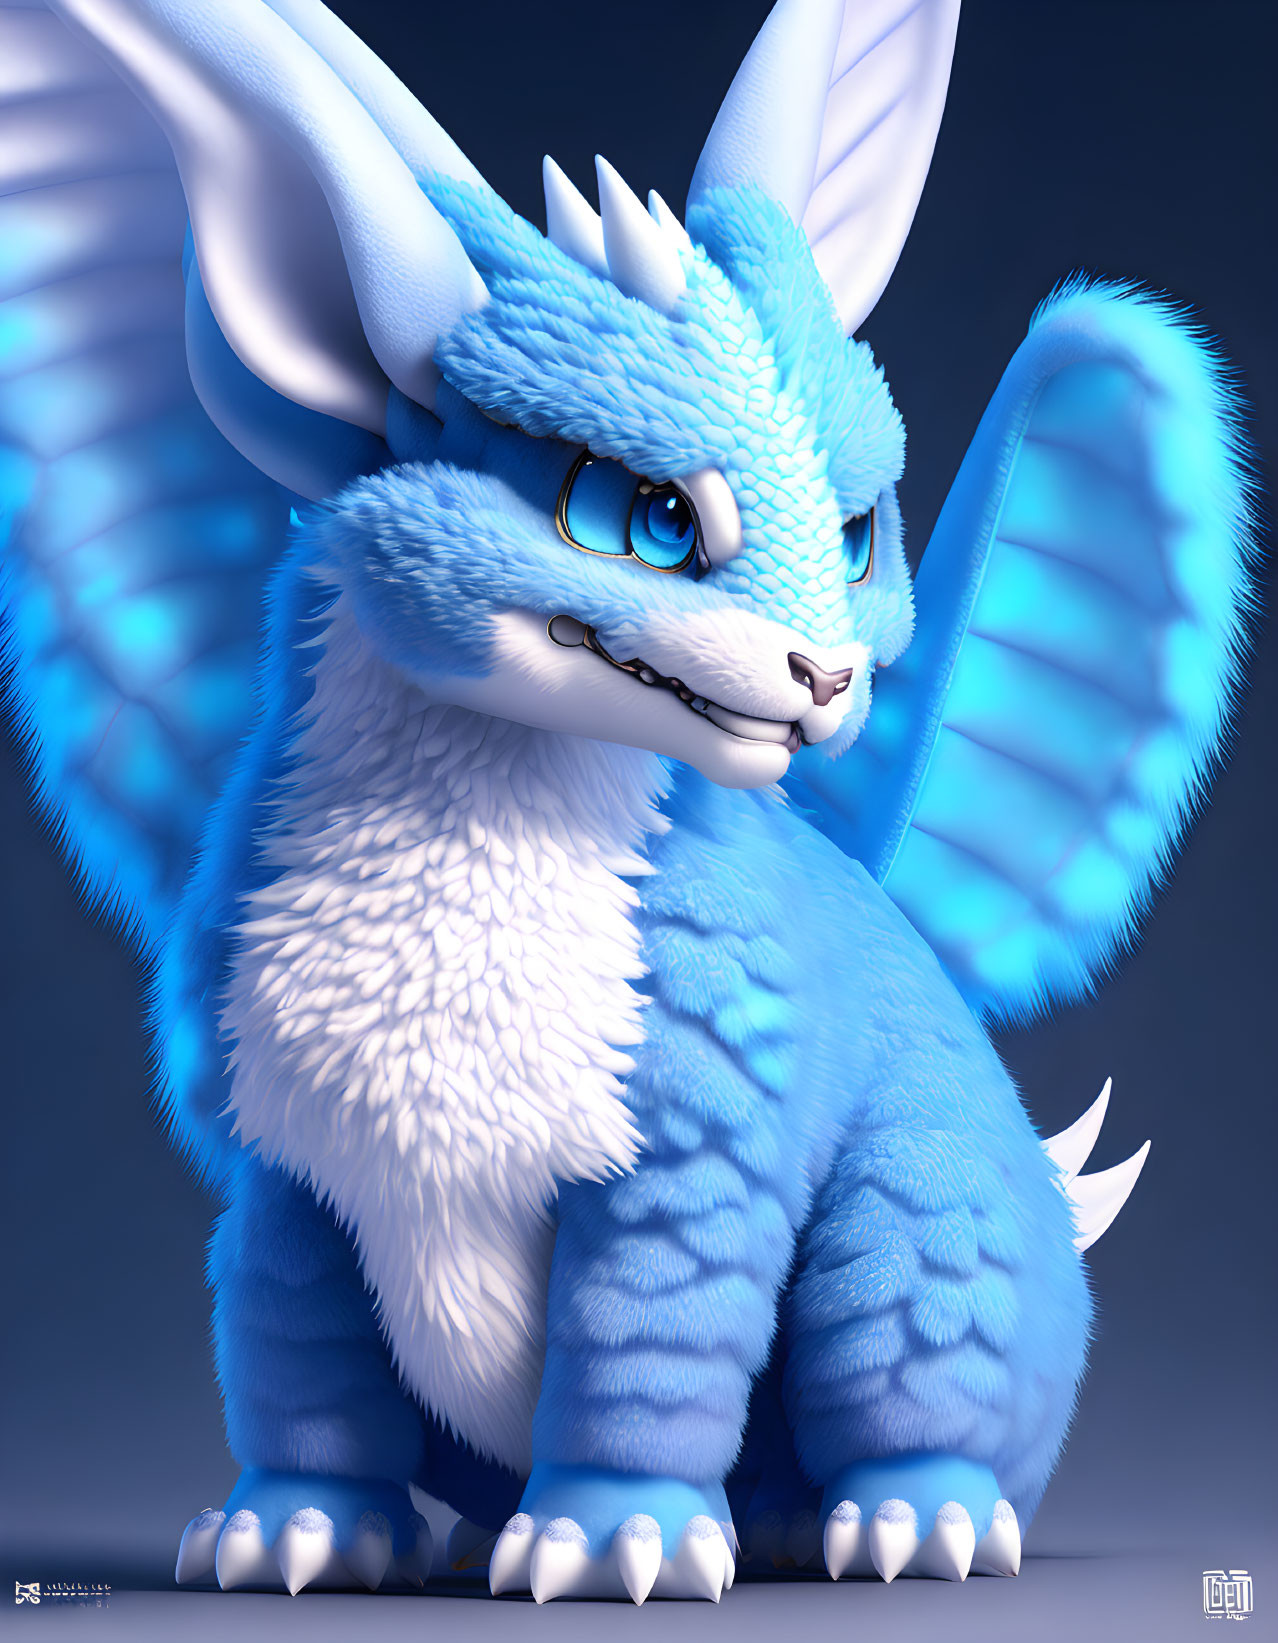 Blue furry dragon-like creature with large wings and friendly expression